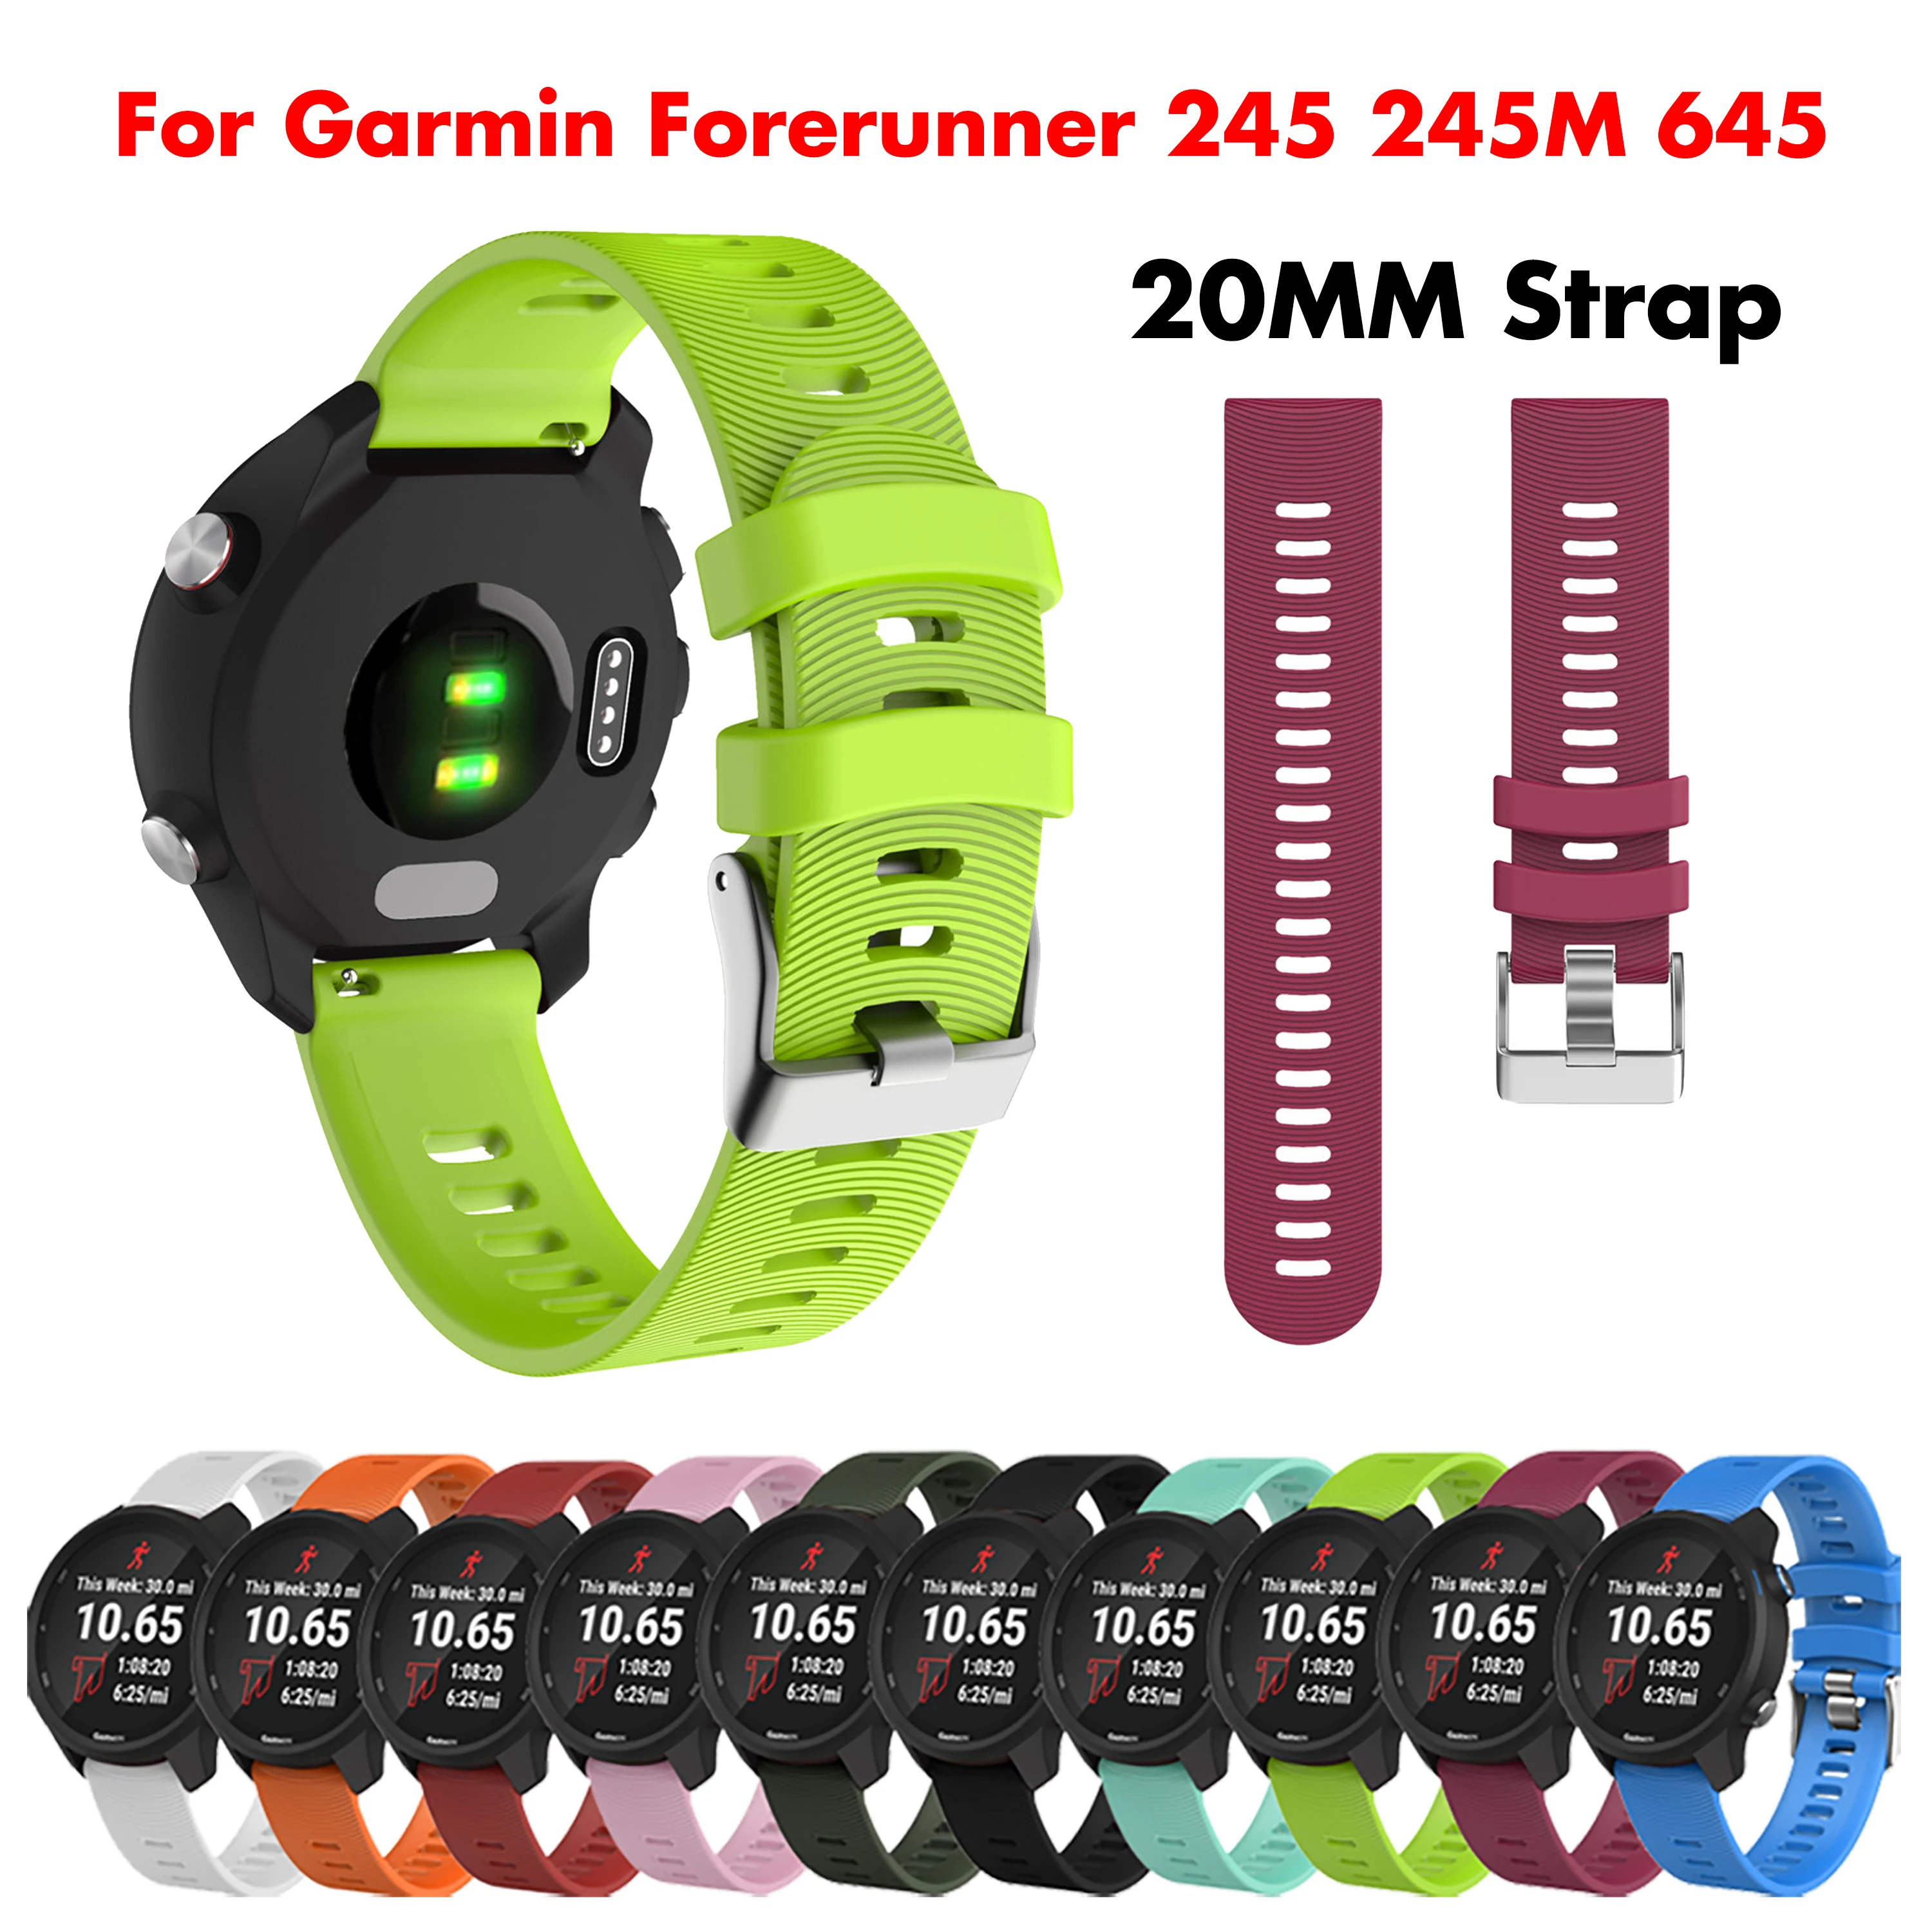 

20MM Watch strap for Garmin Forerunner 245 245M Vivoactive 3 soft silicone Smart watch bands for Forerunner 645 Music Wristbands